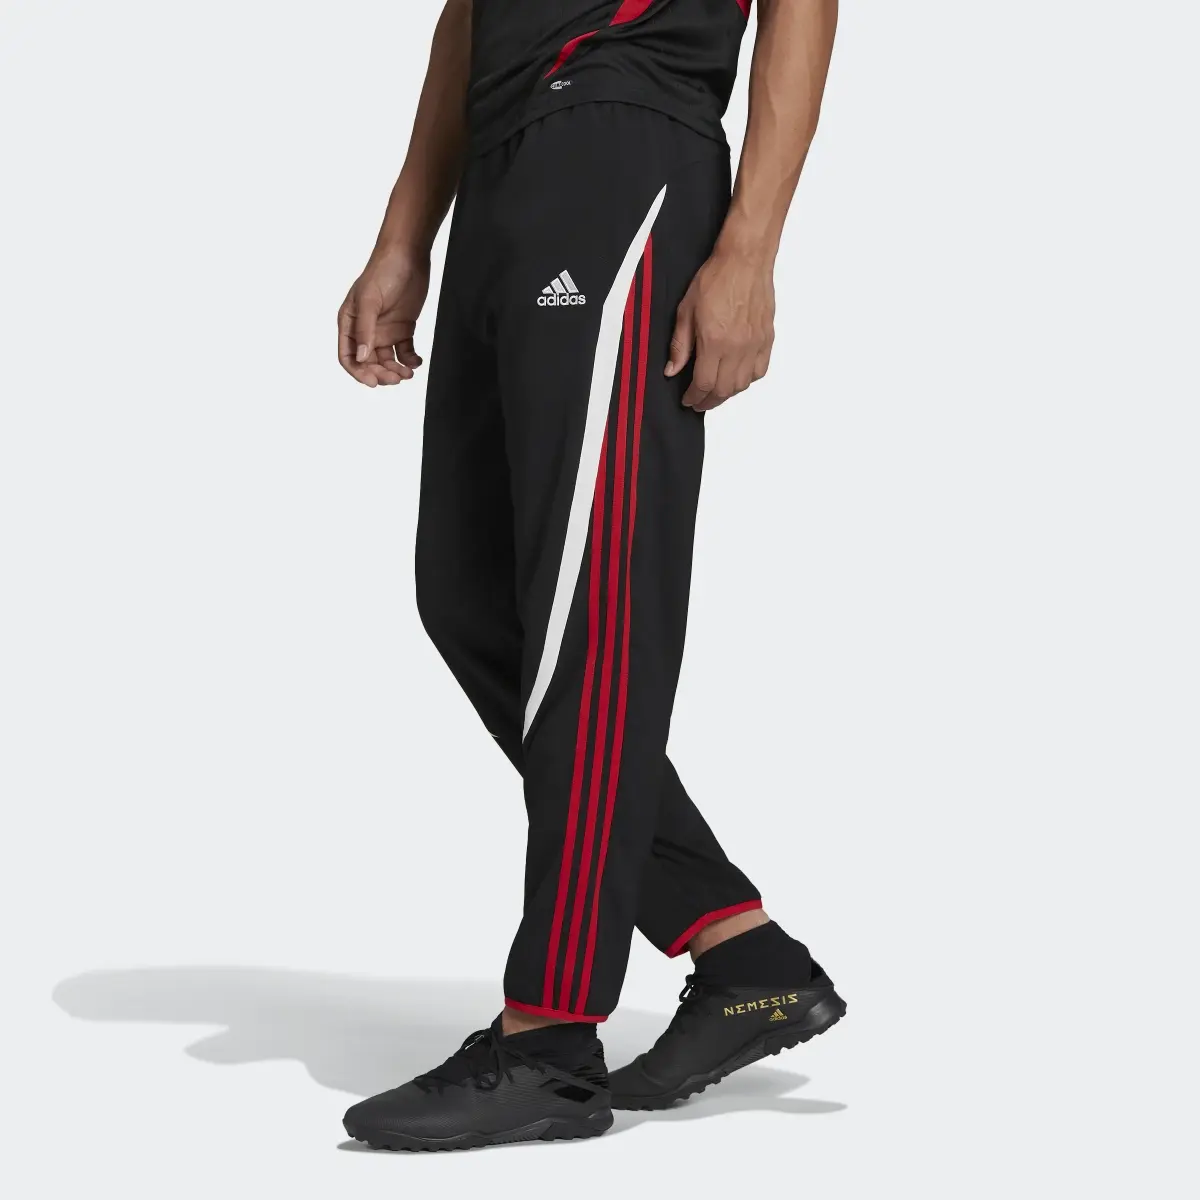 Adidas Manchester United Teamgeist Woven Pants. 2